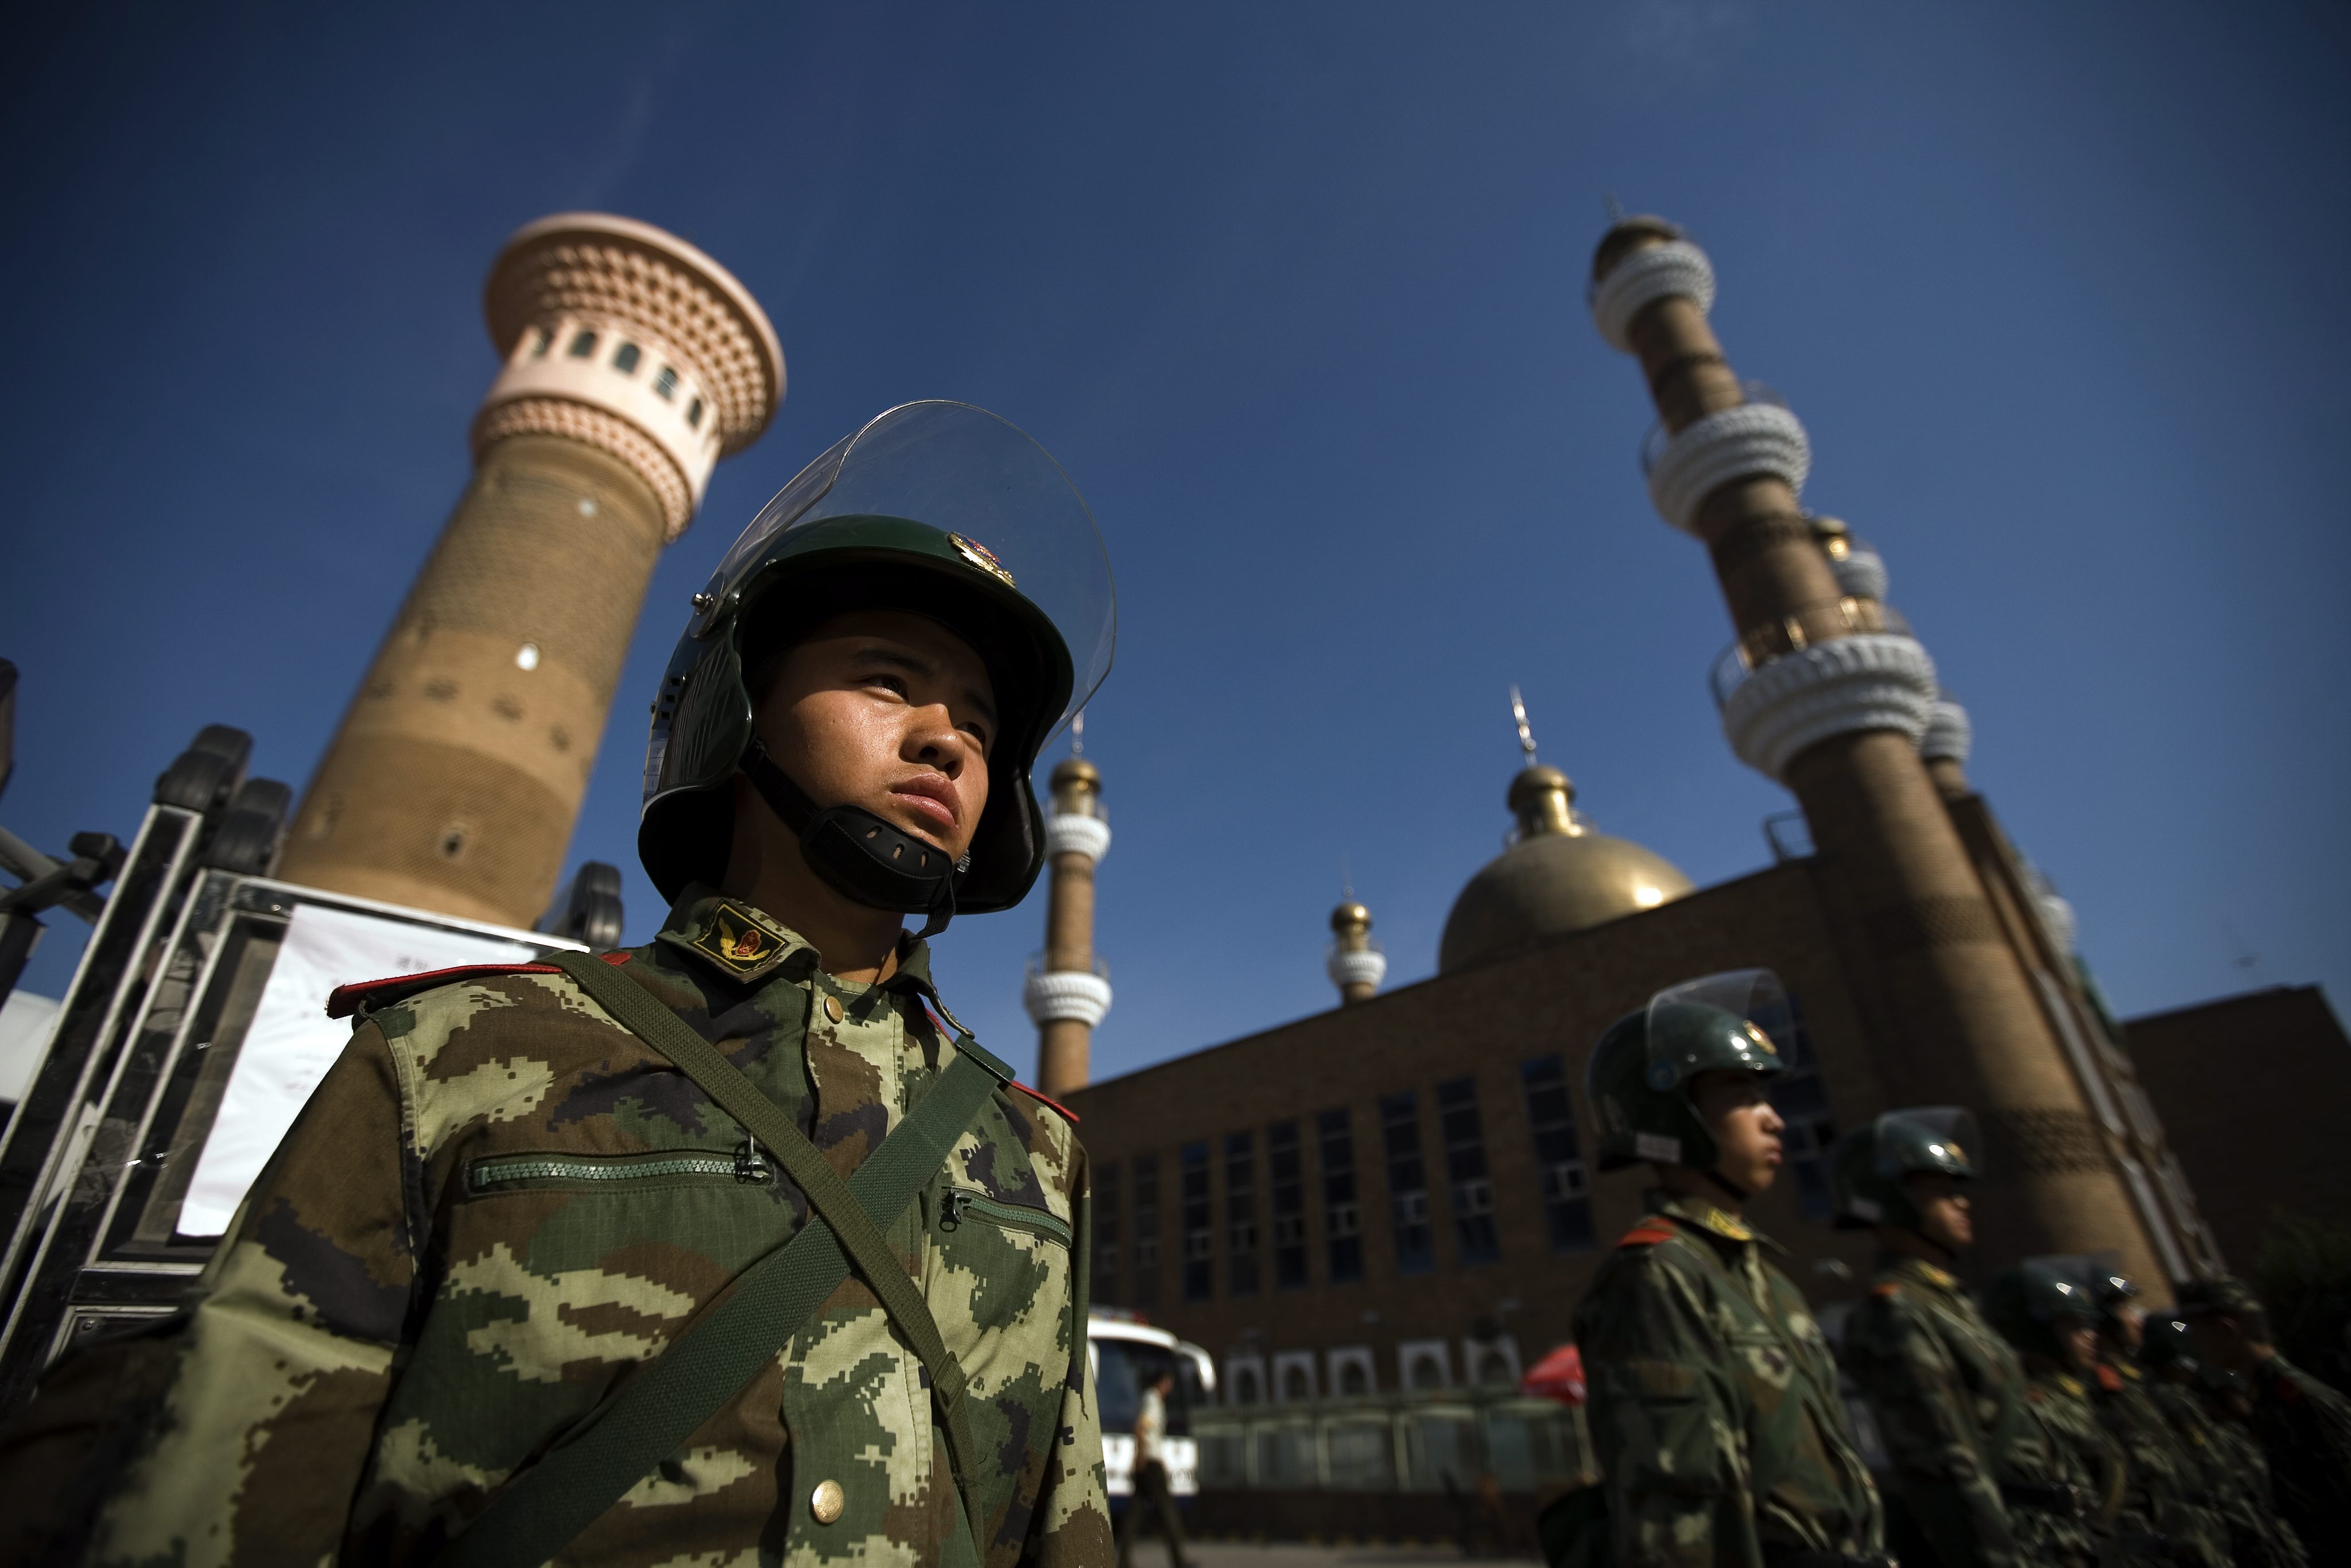 Qurans, Prayer Mats Confiscated in Xinjiang